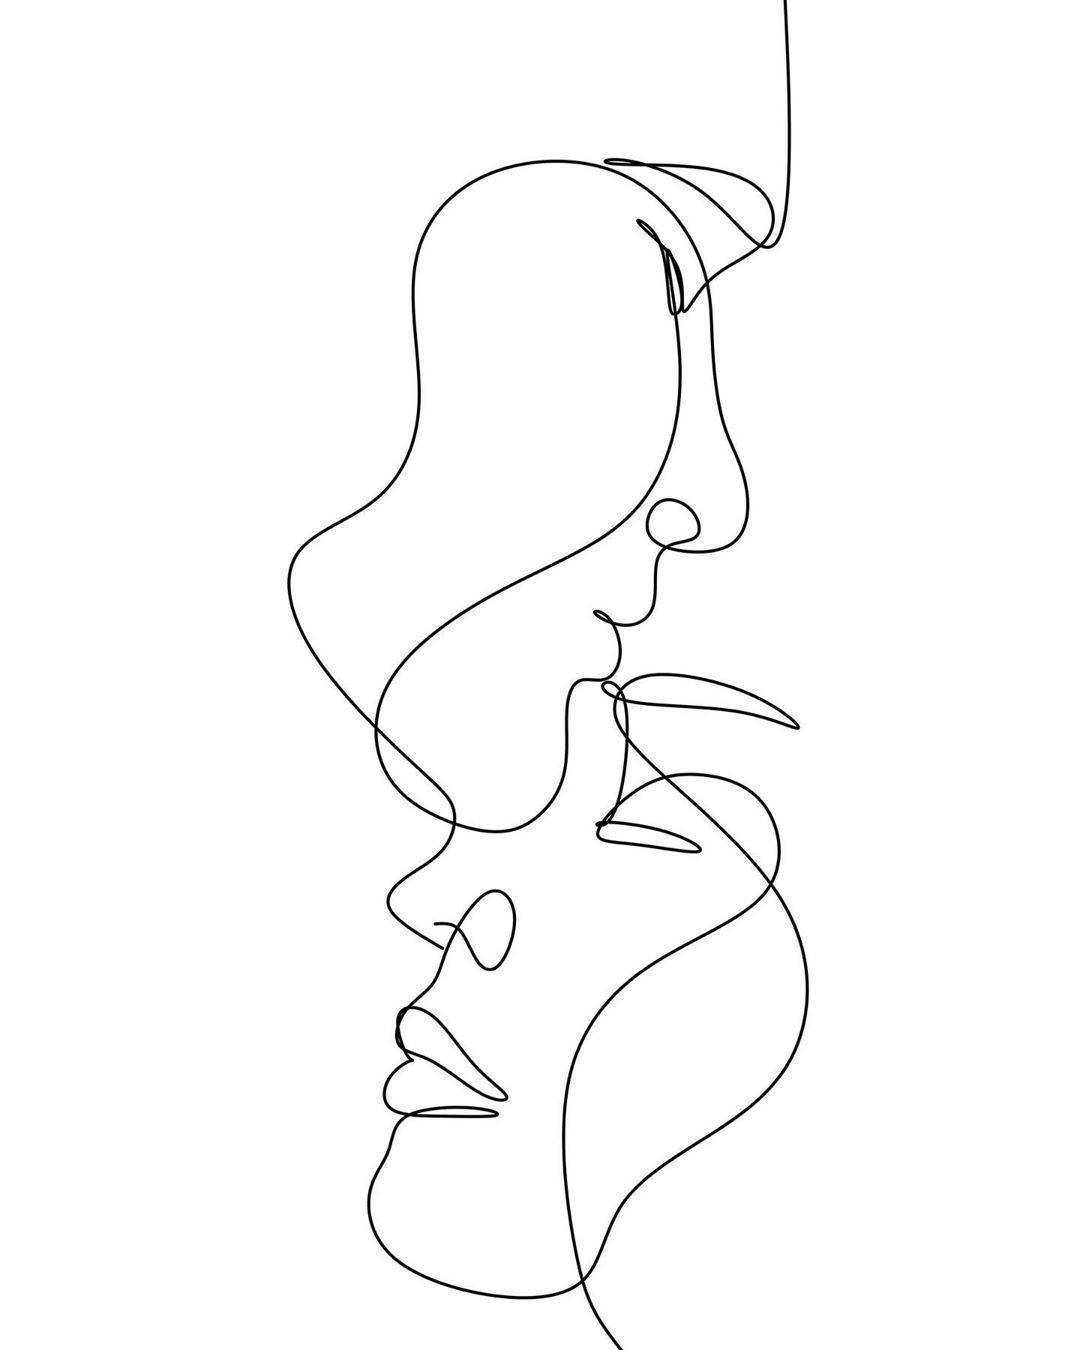 Forehead Kiss One Line Drawing Wallpaper